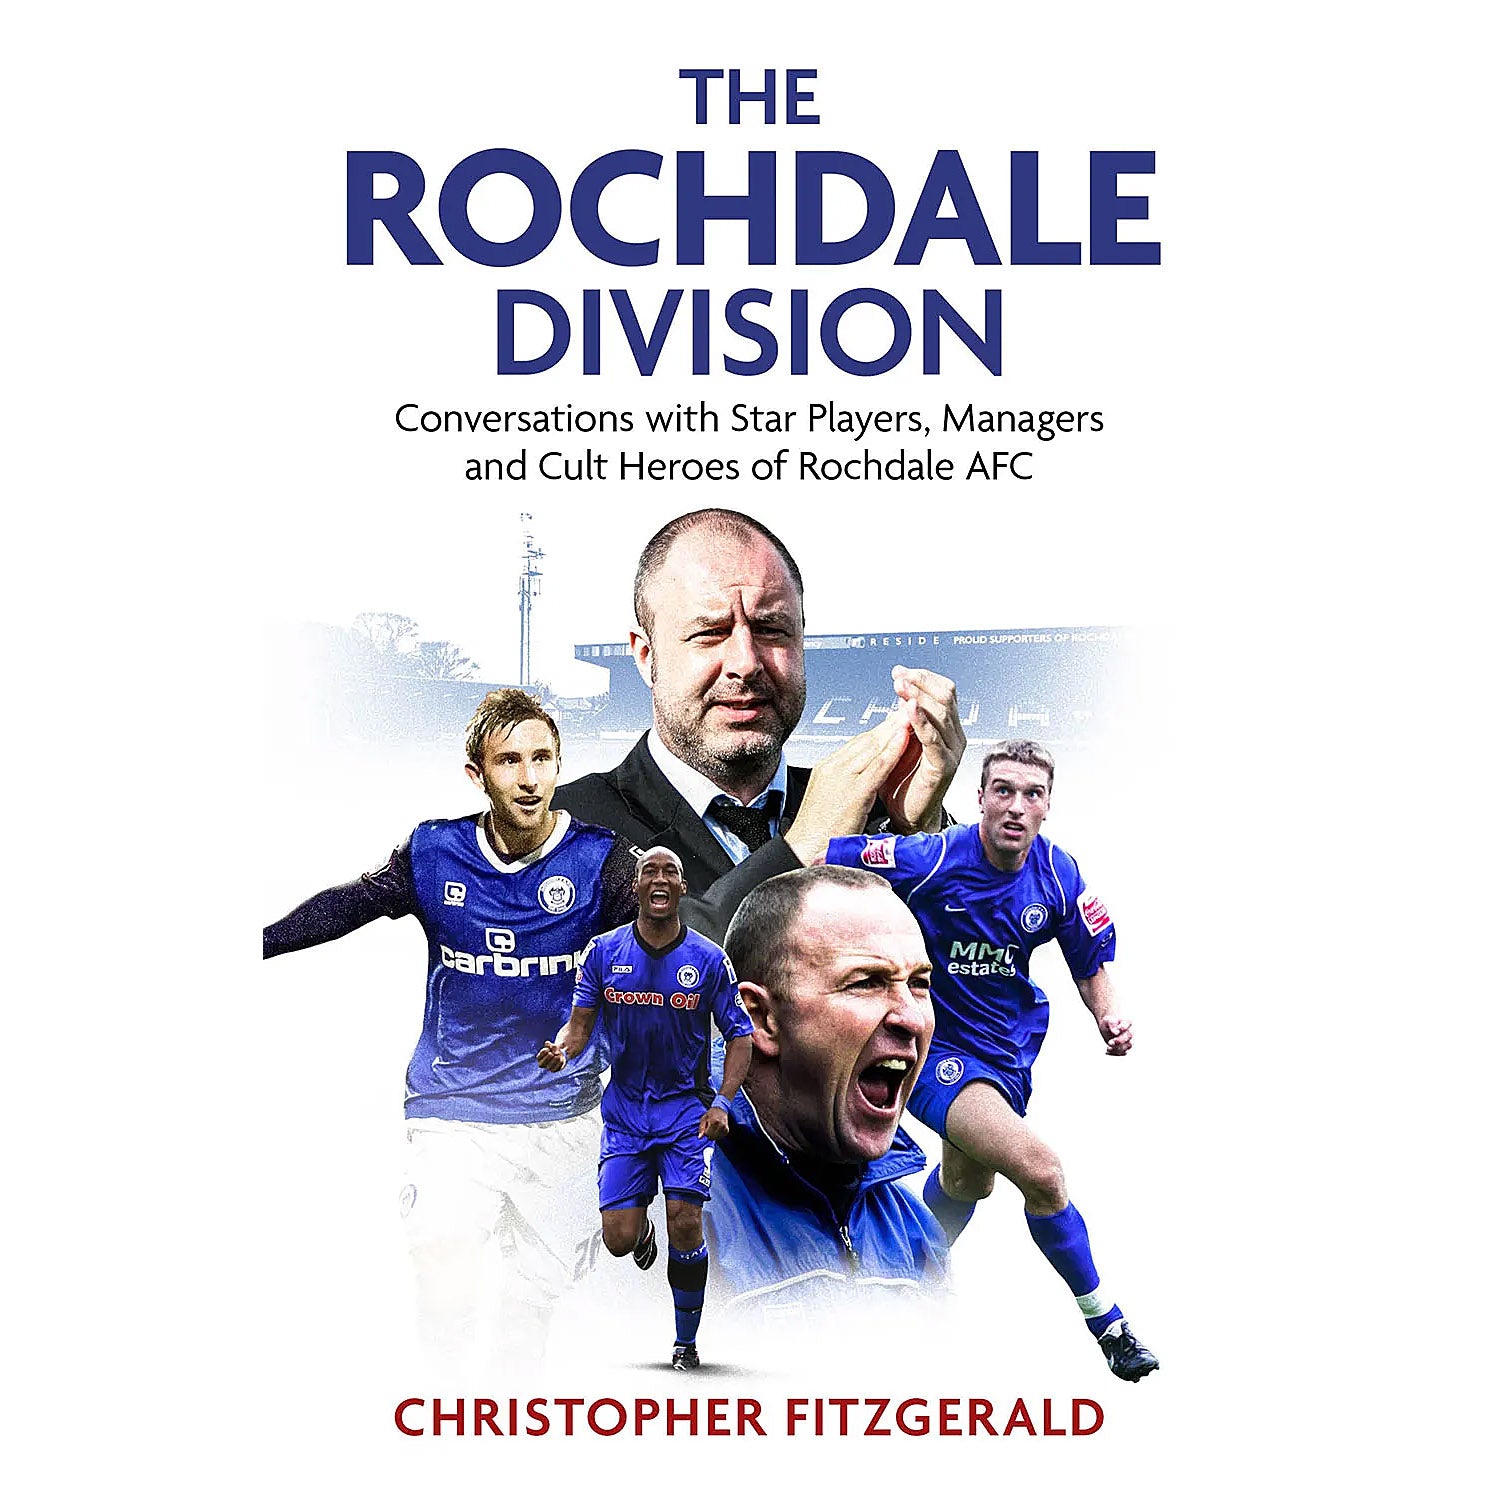 The Rochdale Division – Conversations with Star Players, Managers and Cult Heroes of Rochdale AFC